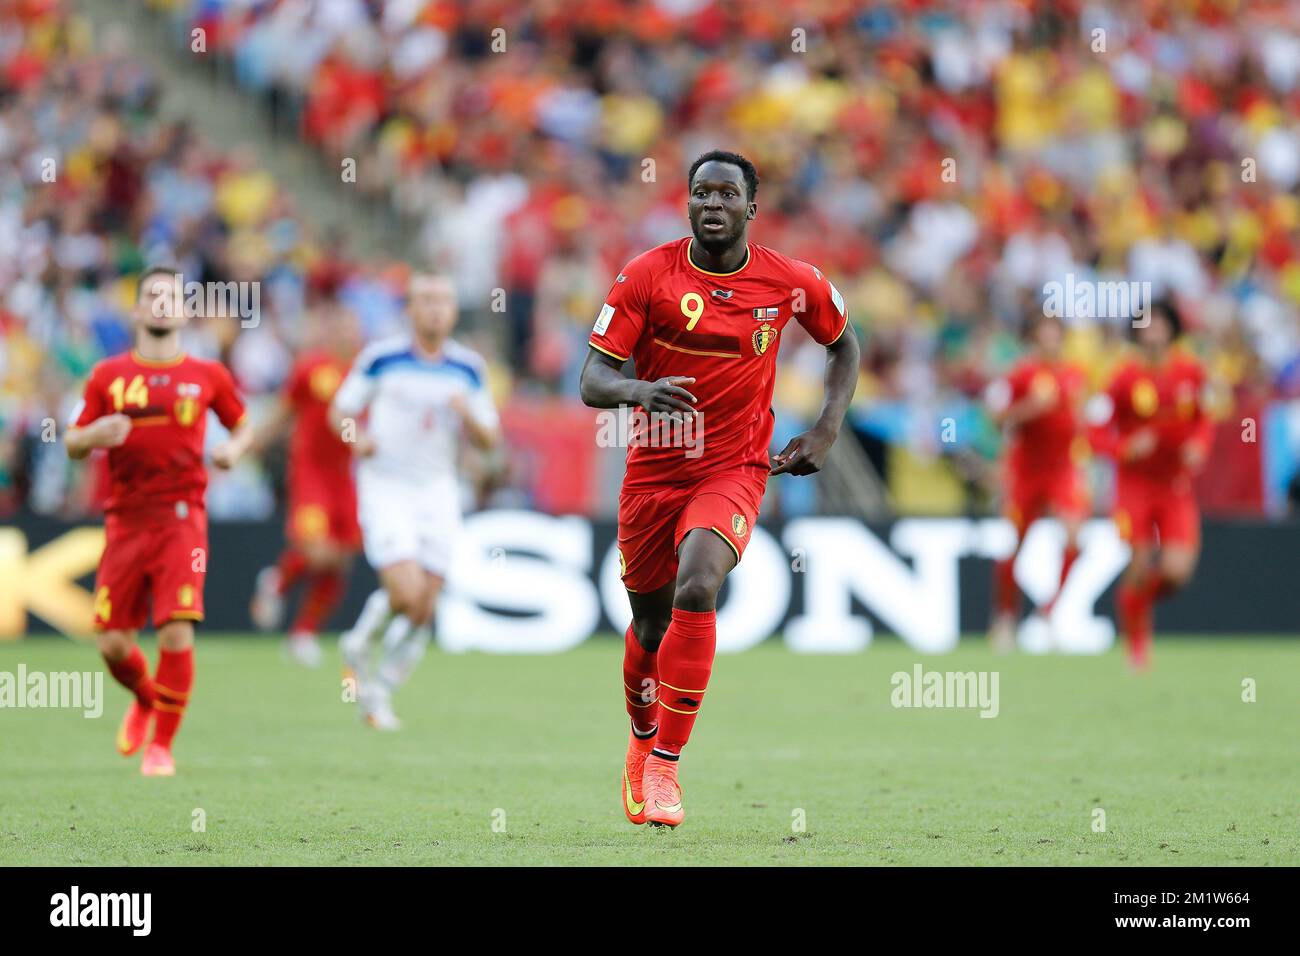 20140622 - RIO DE JANEIRO, BRAZIL: Belgium's Romelu Lukaku pictured during a soccer game between Belgian national team The Red Devils and Russia in Rio de Janeiro, Brazil, the second game in Group H of the first round of the 2014 FIFA World Cup, Sunday 22 June 2014. BELGA PHOTO BRUNO FAHY Stock Photo